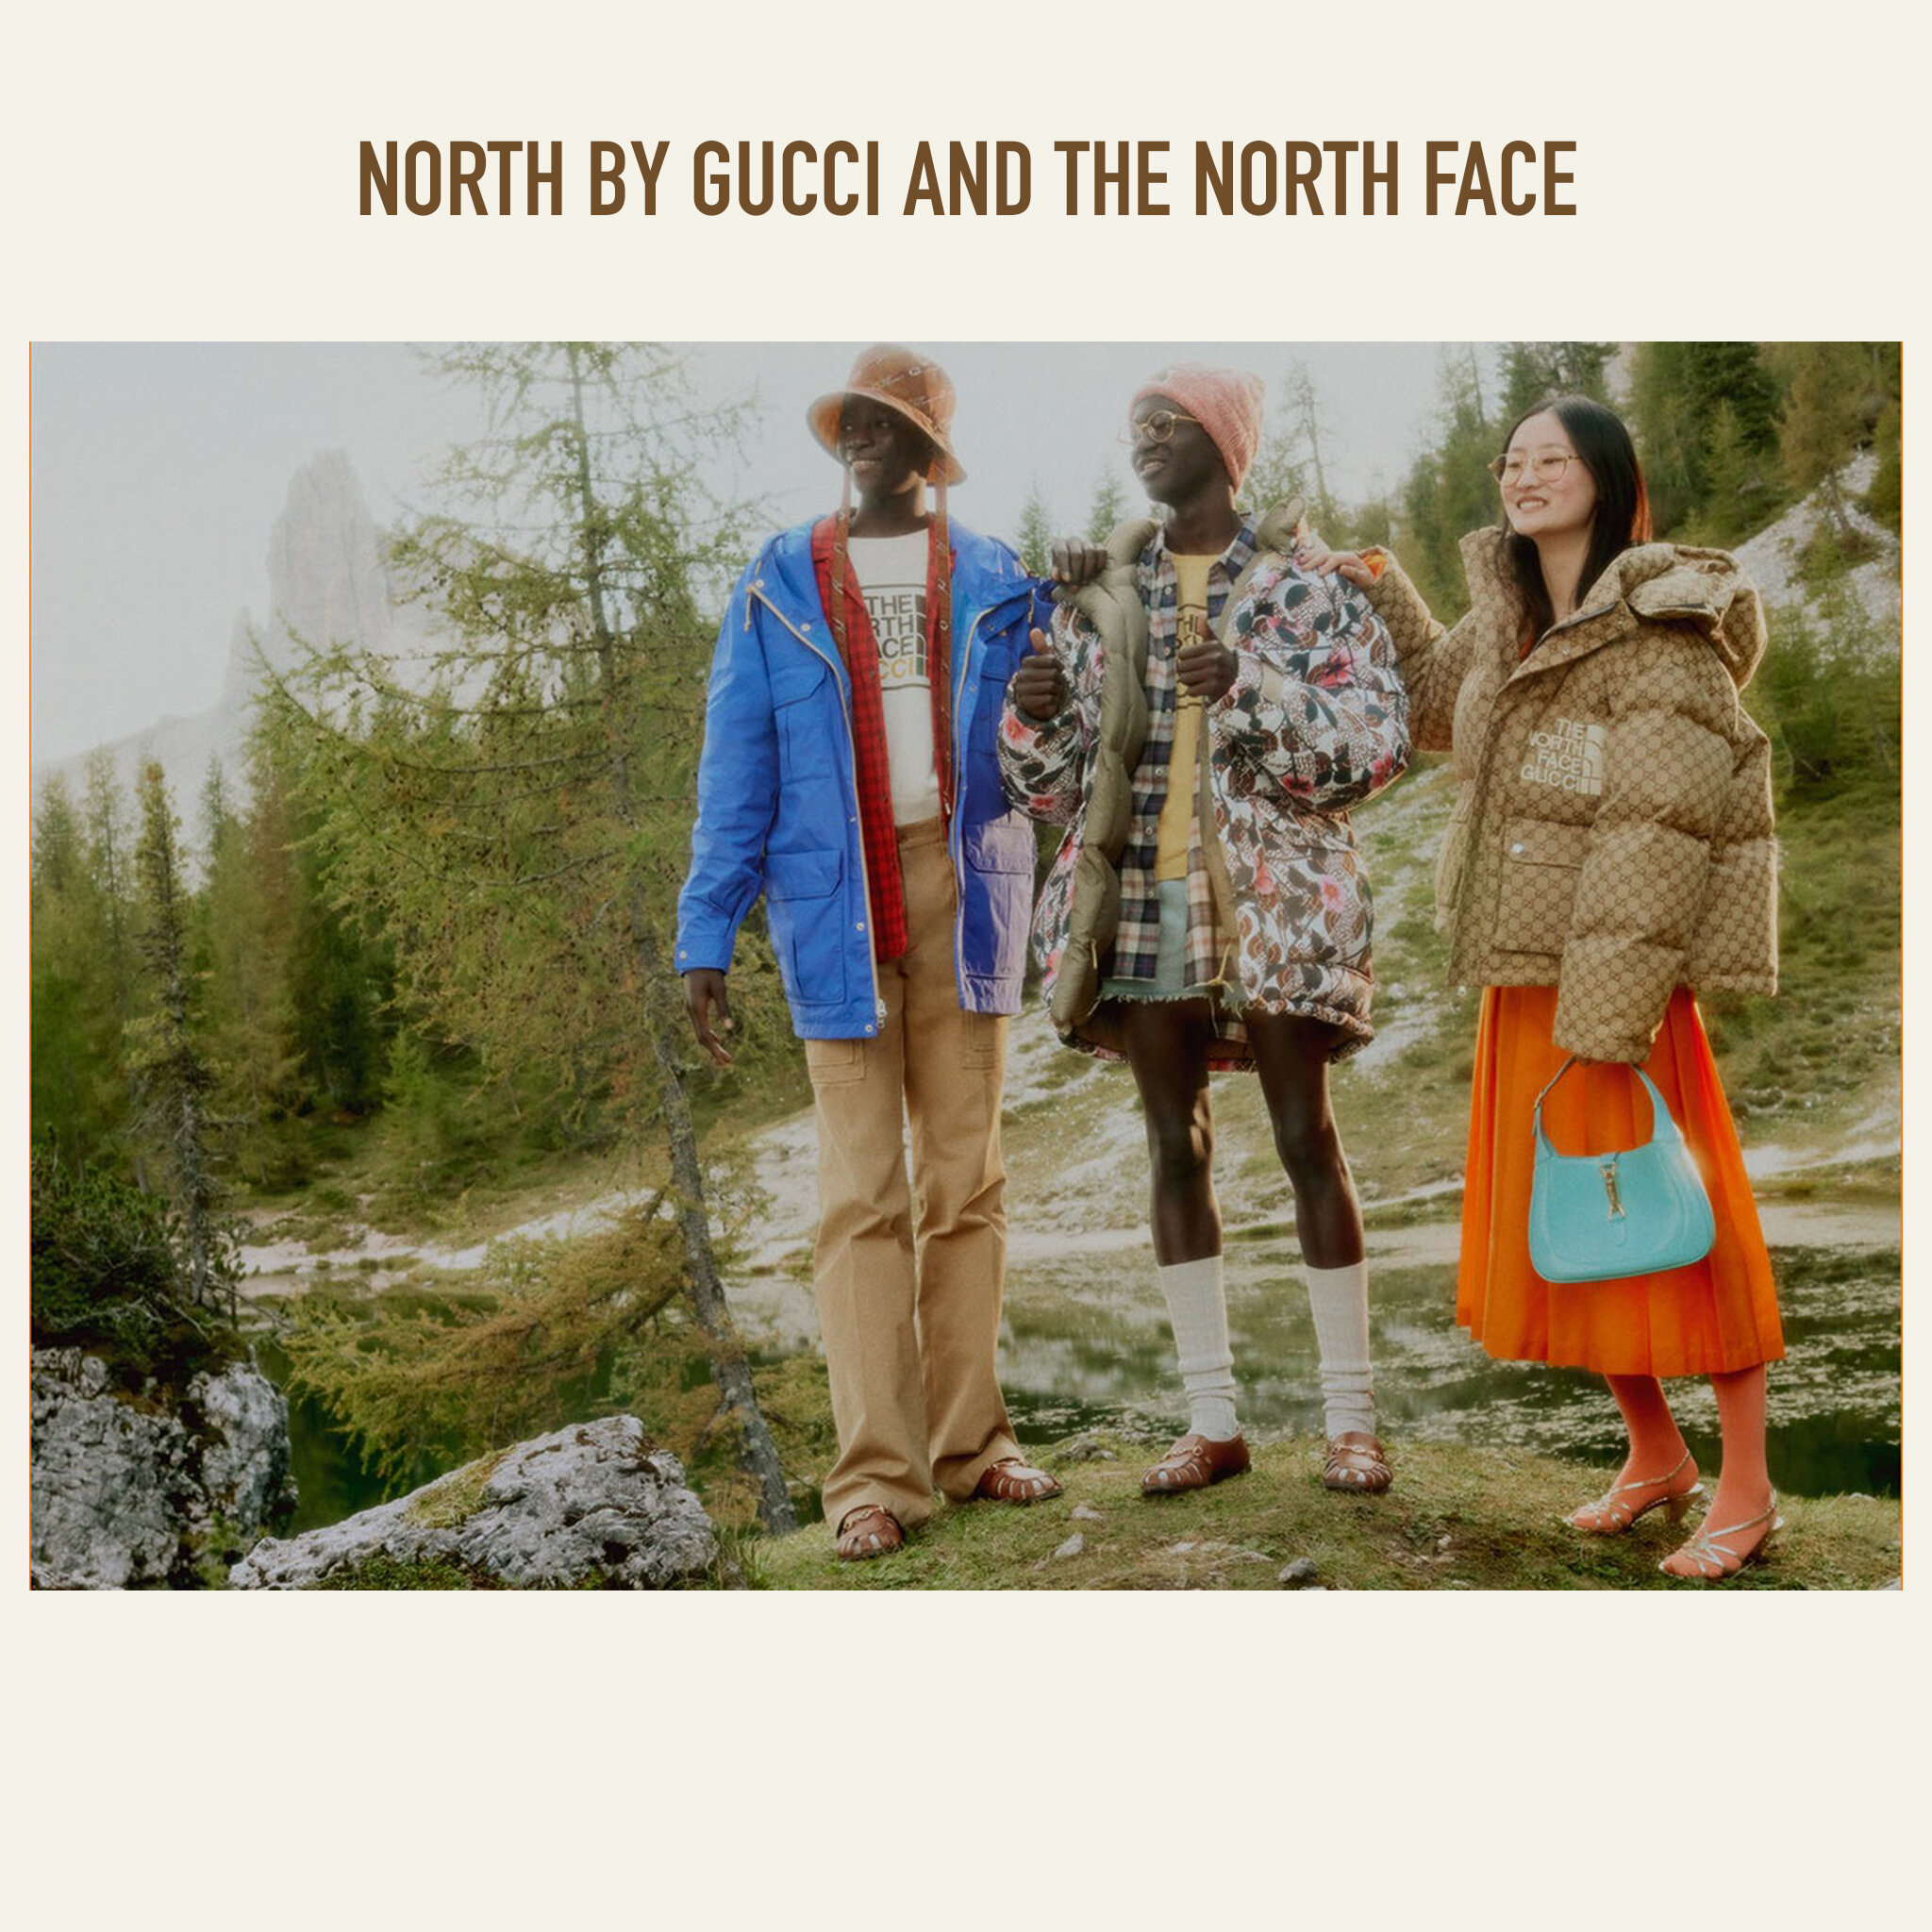 The Gucci x North Face Collaboration Reminds Us of Jennifer